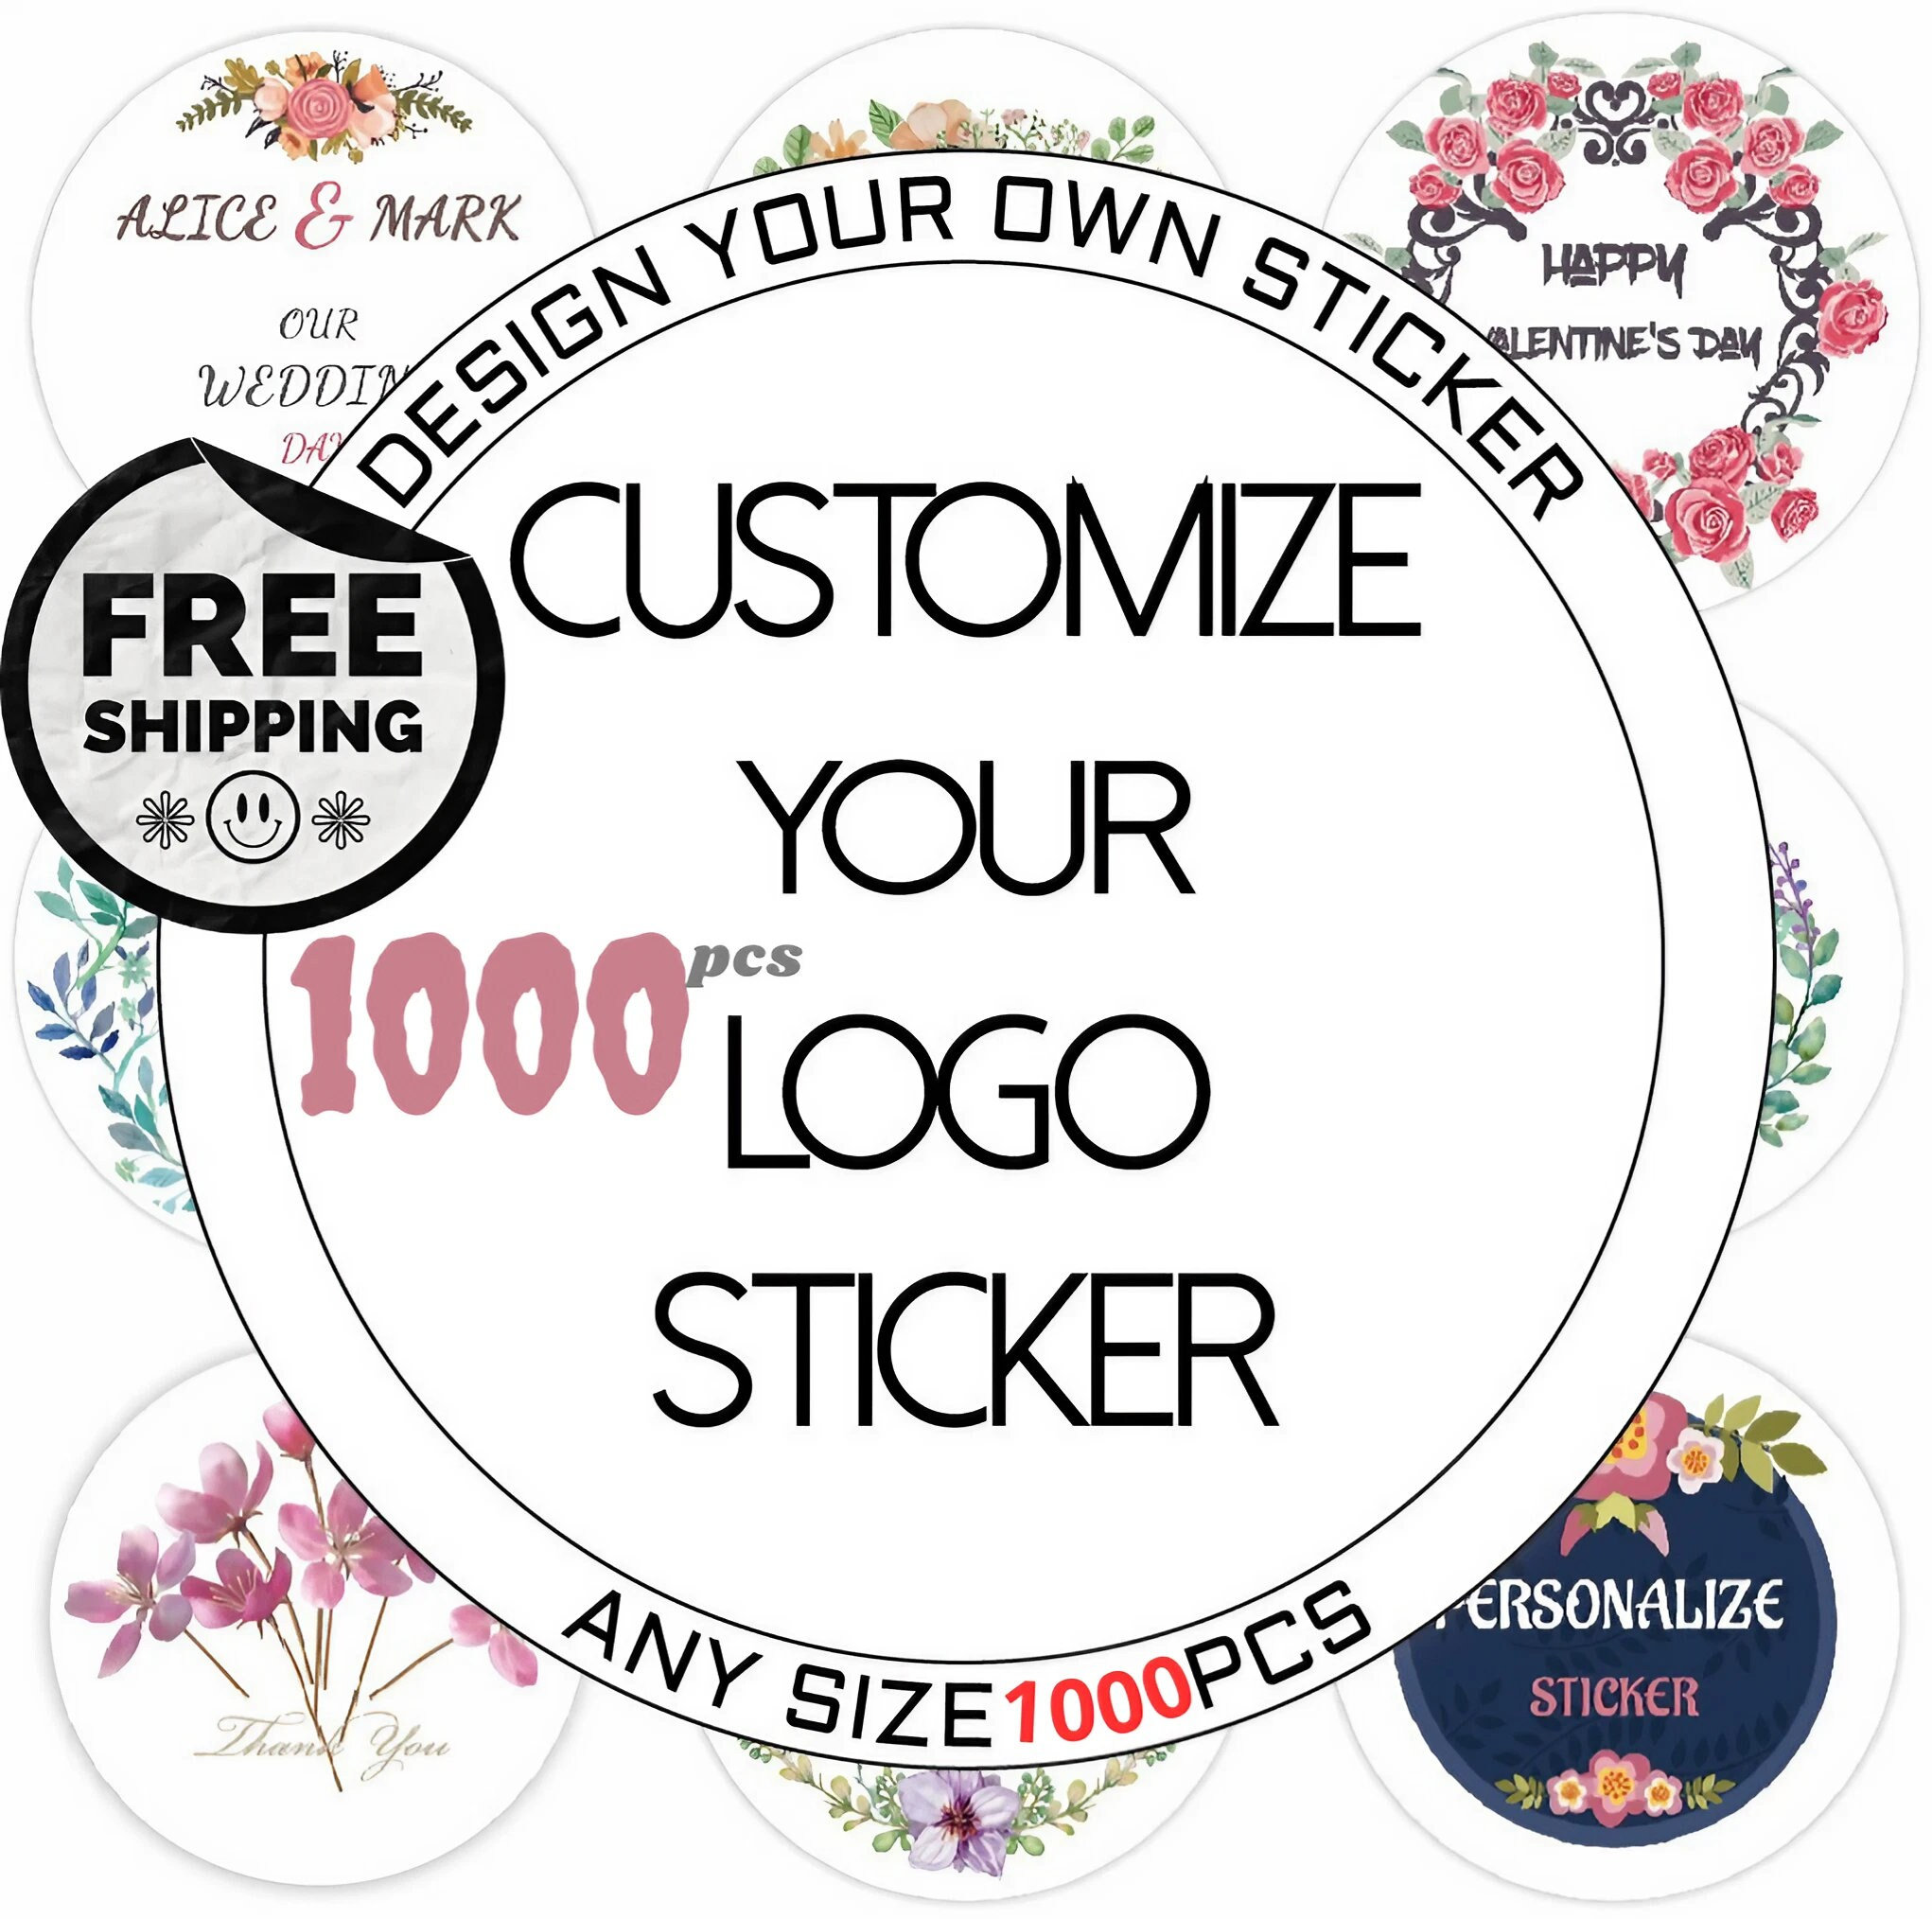 WHOLESALE SQUARE LOGO Stickers Buy in Bulk, Stock up and Save up